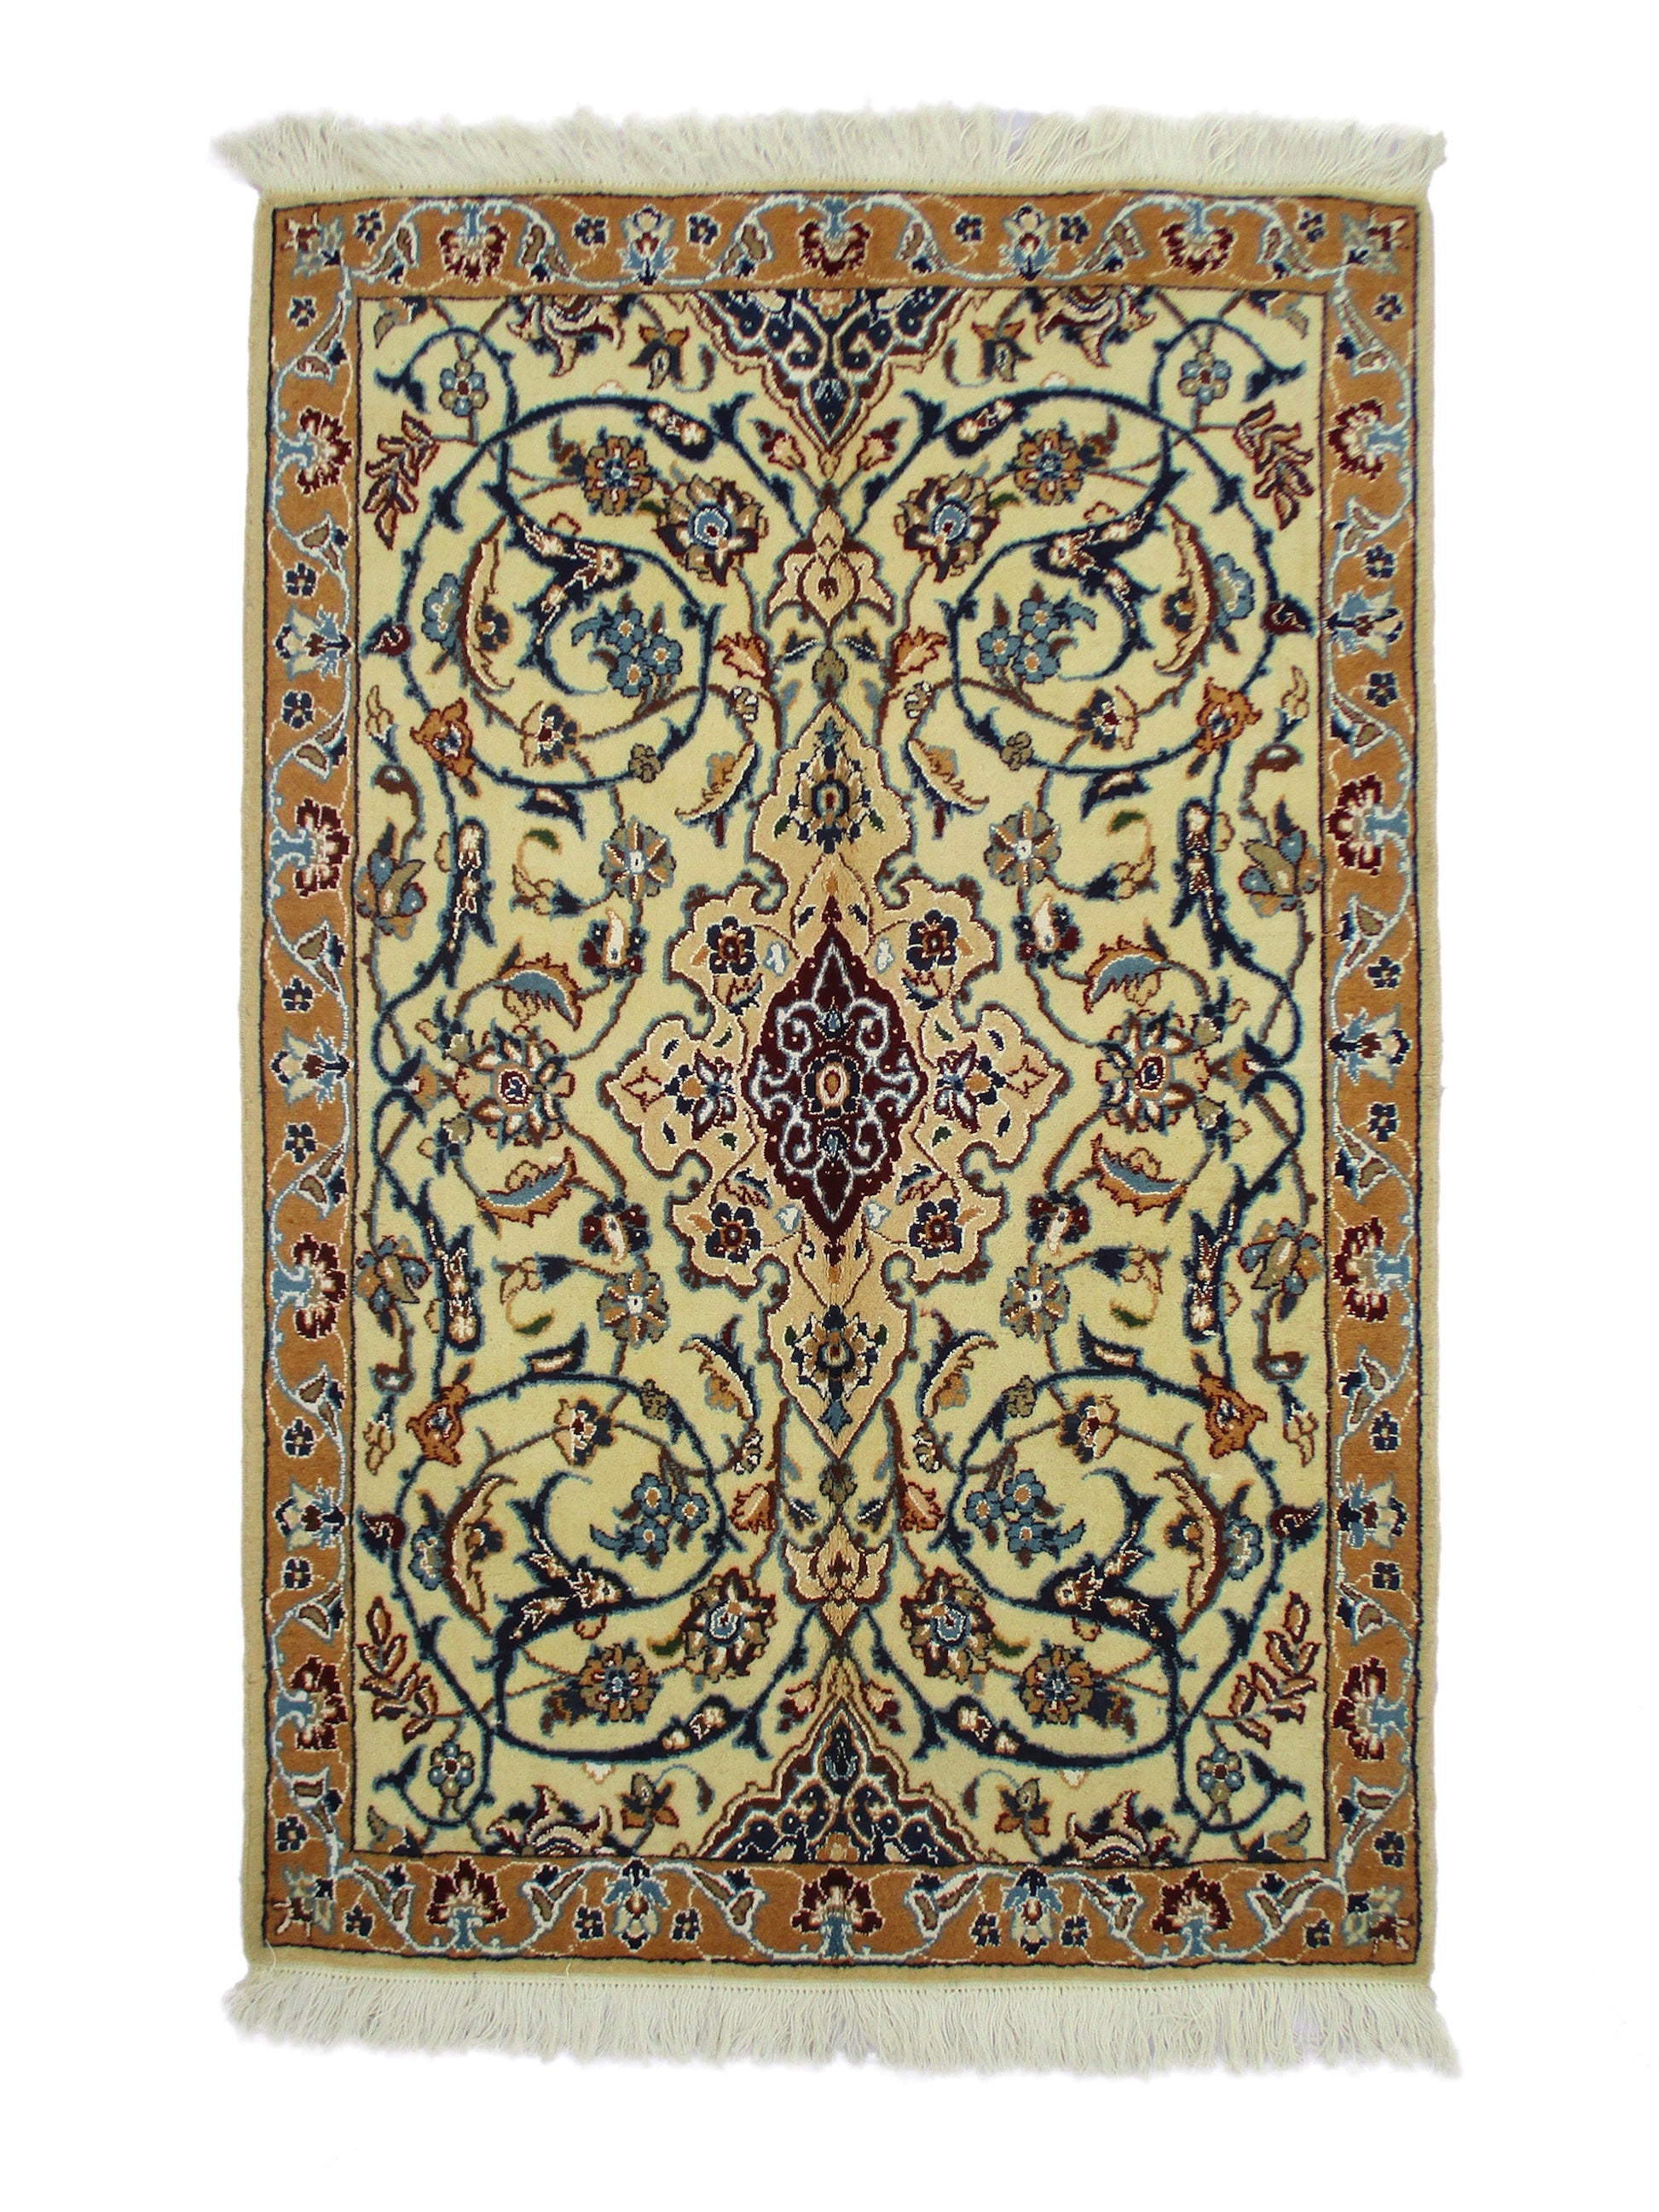 3 x 4 Feet Beige Blue Turkish Caucasian Rug | Hand Woven Area Rug | Oriental Persian Rug | Living Room Rug | Accent Floral Pattern Wool Rug